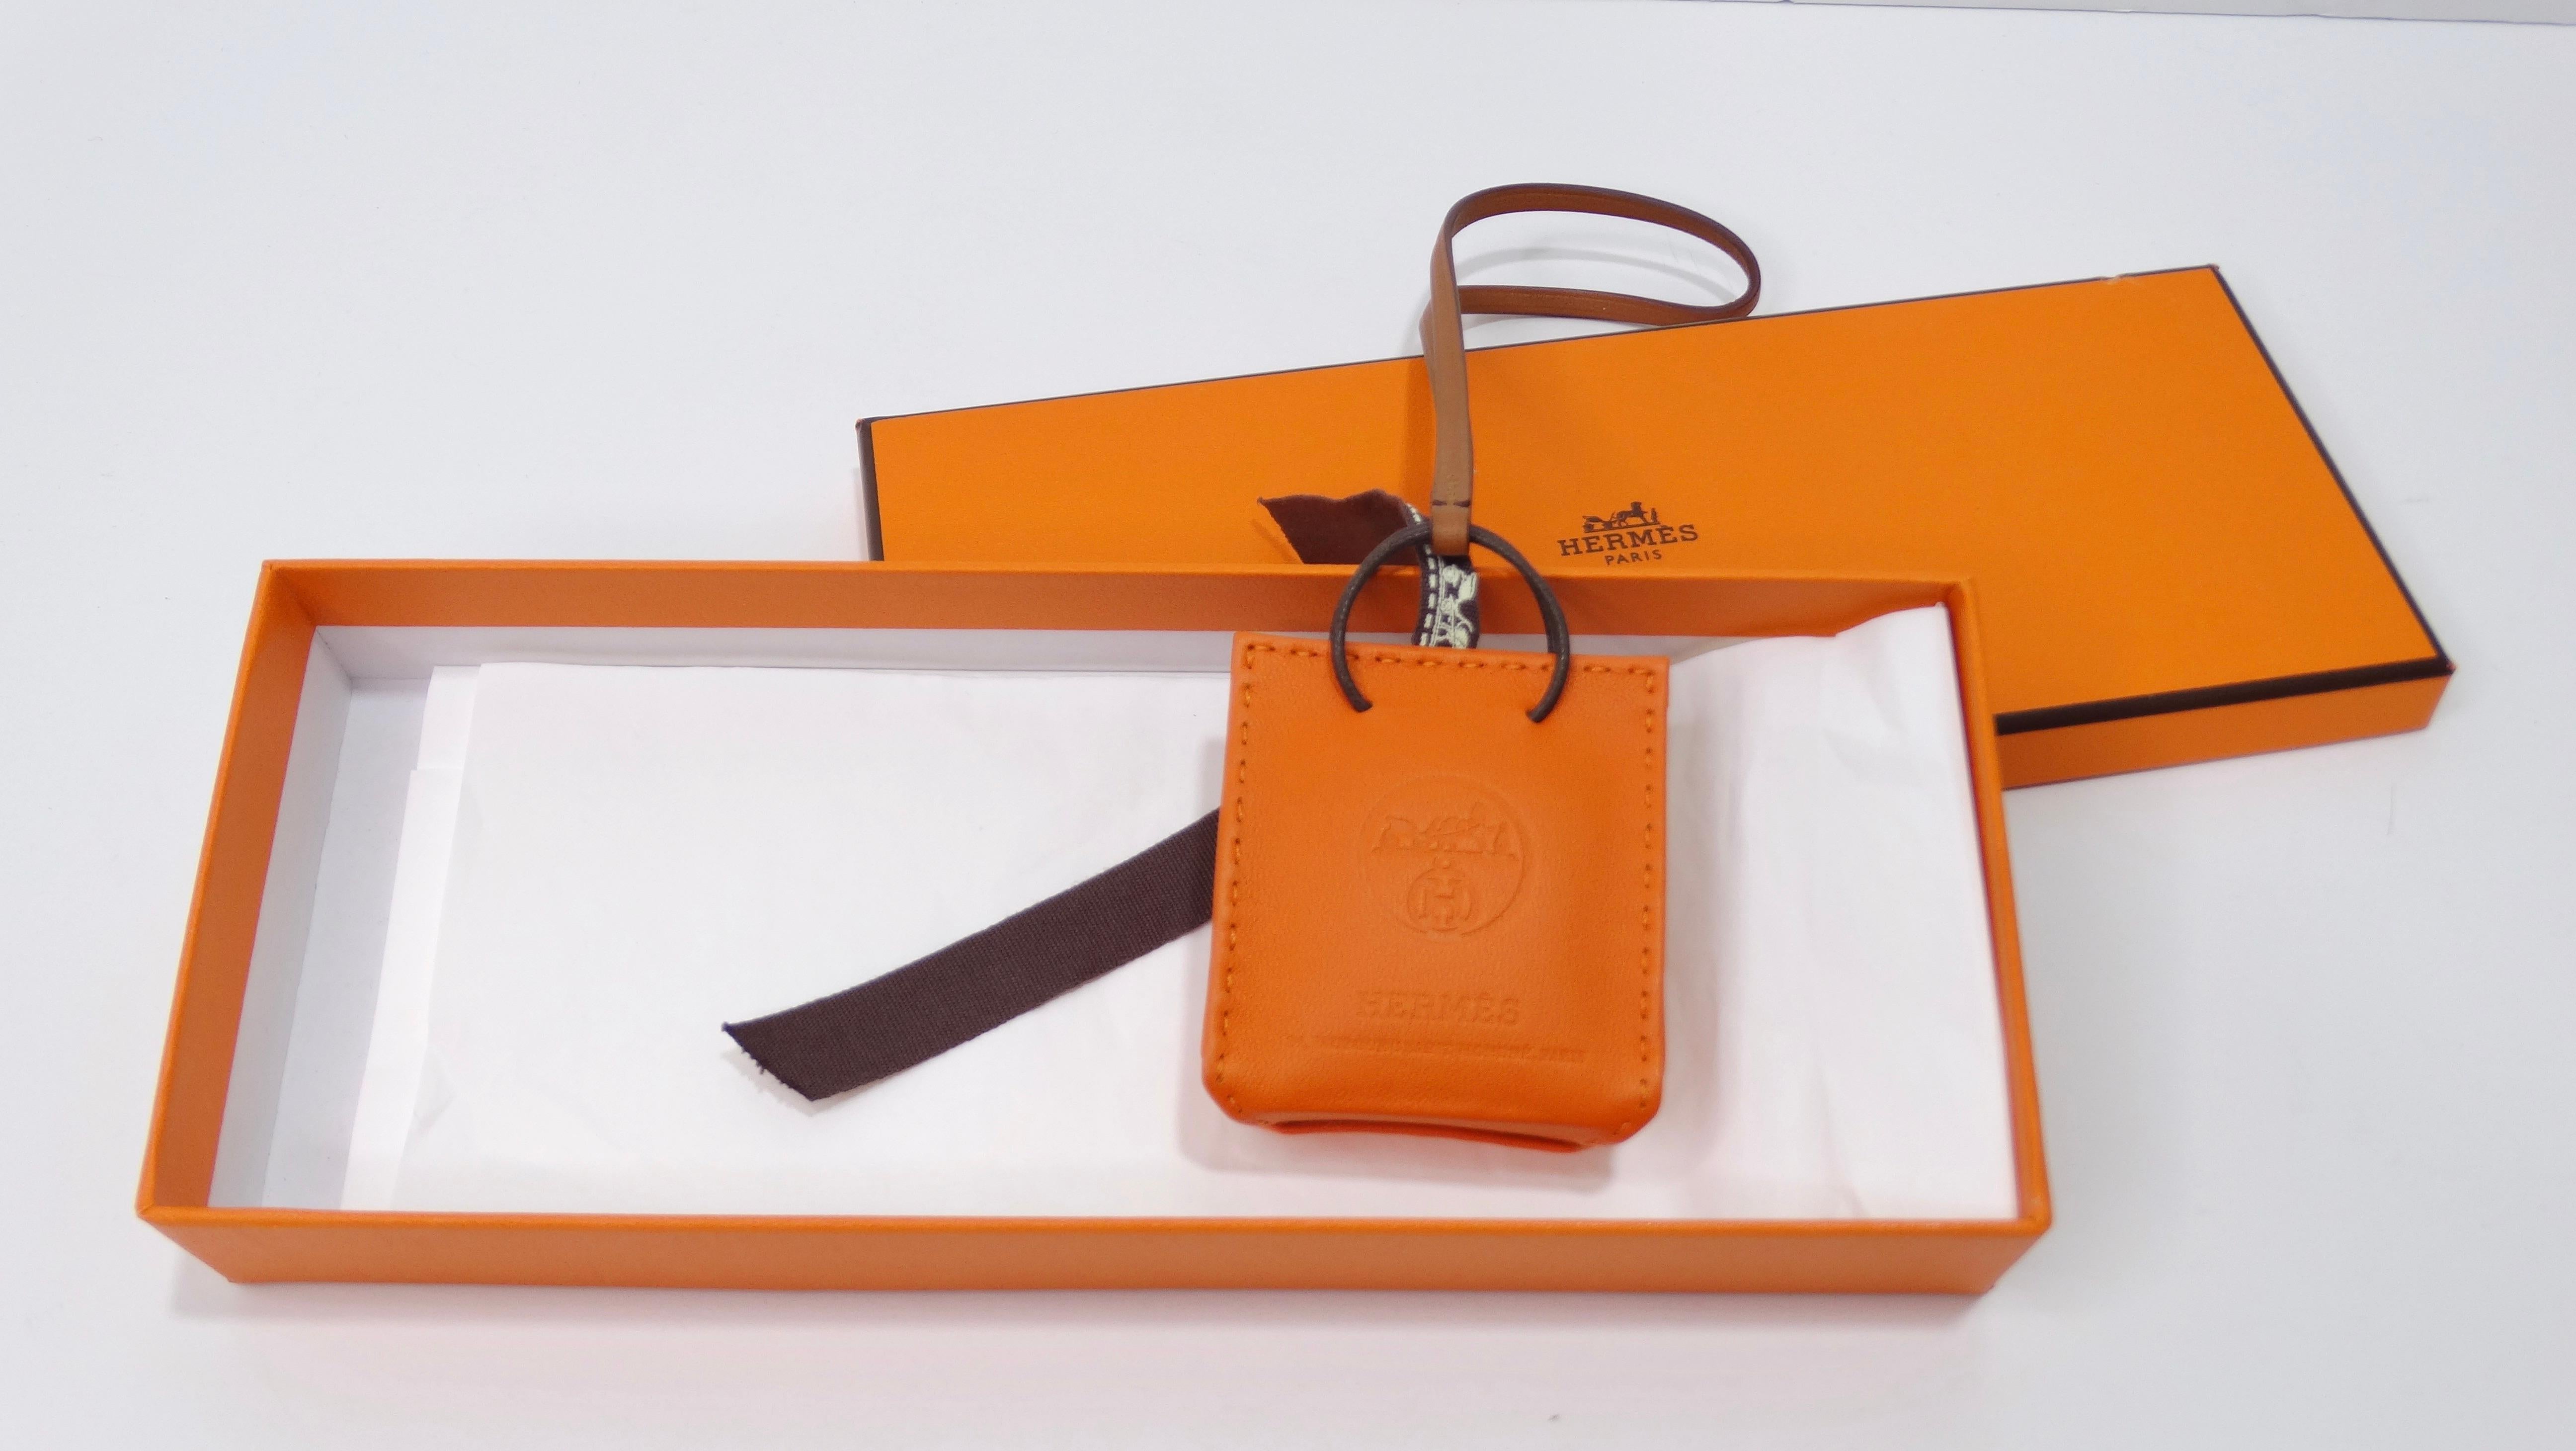 Bring a little flair to your everyday handbag! The key to making fashion effortless is having fun and putting your own unique twist on your ensembles. This is a tiny replica of the Hermes handbag, and will be sure to add a bright touch to your